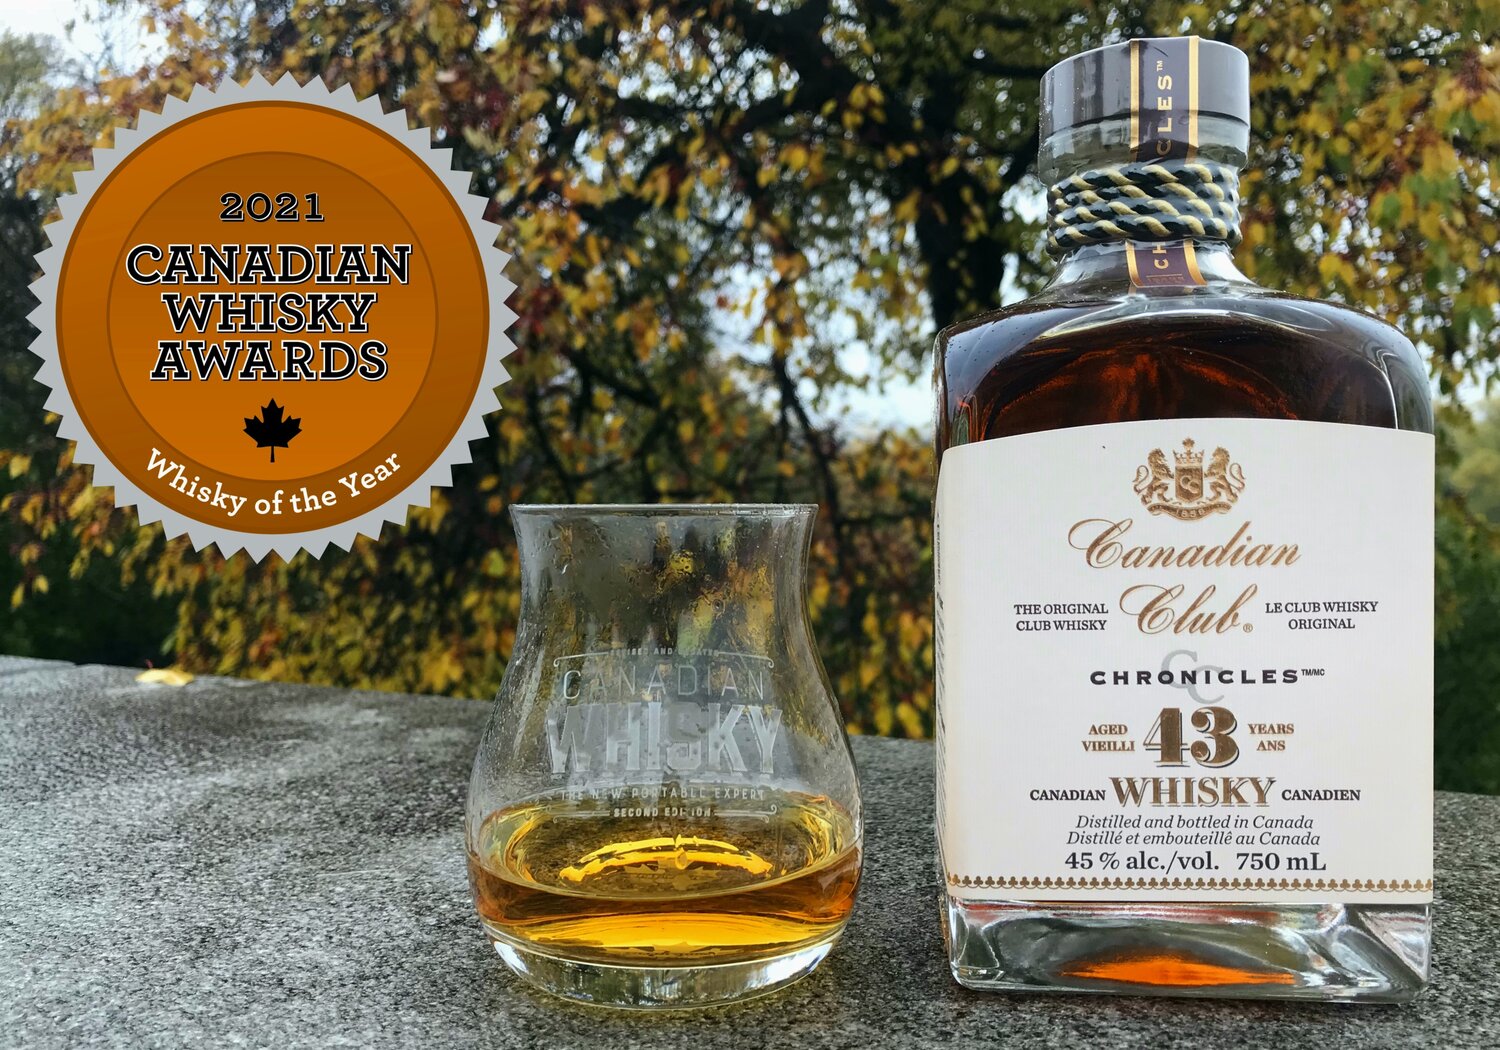 Best Canadian Whisky Canadian Club 43 Canadian Whisky Awards 2021